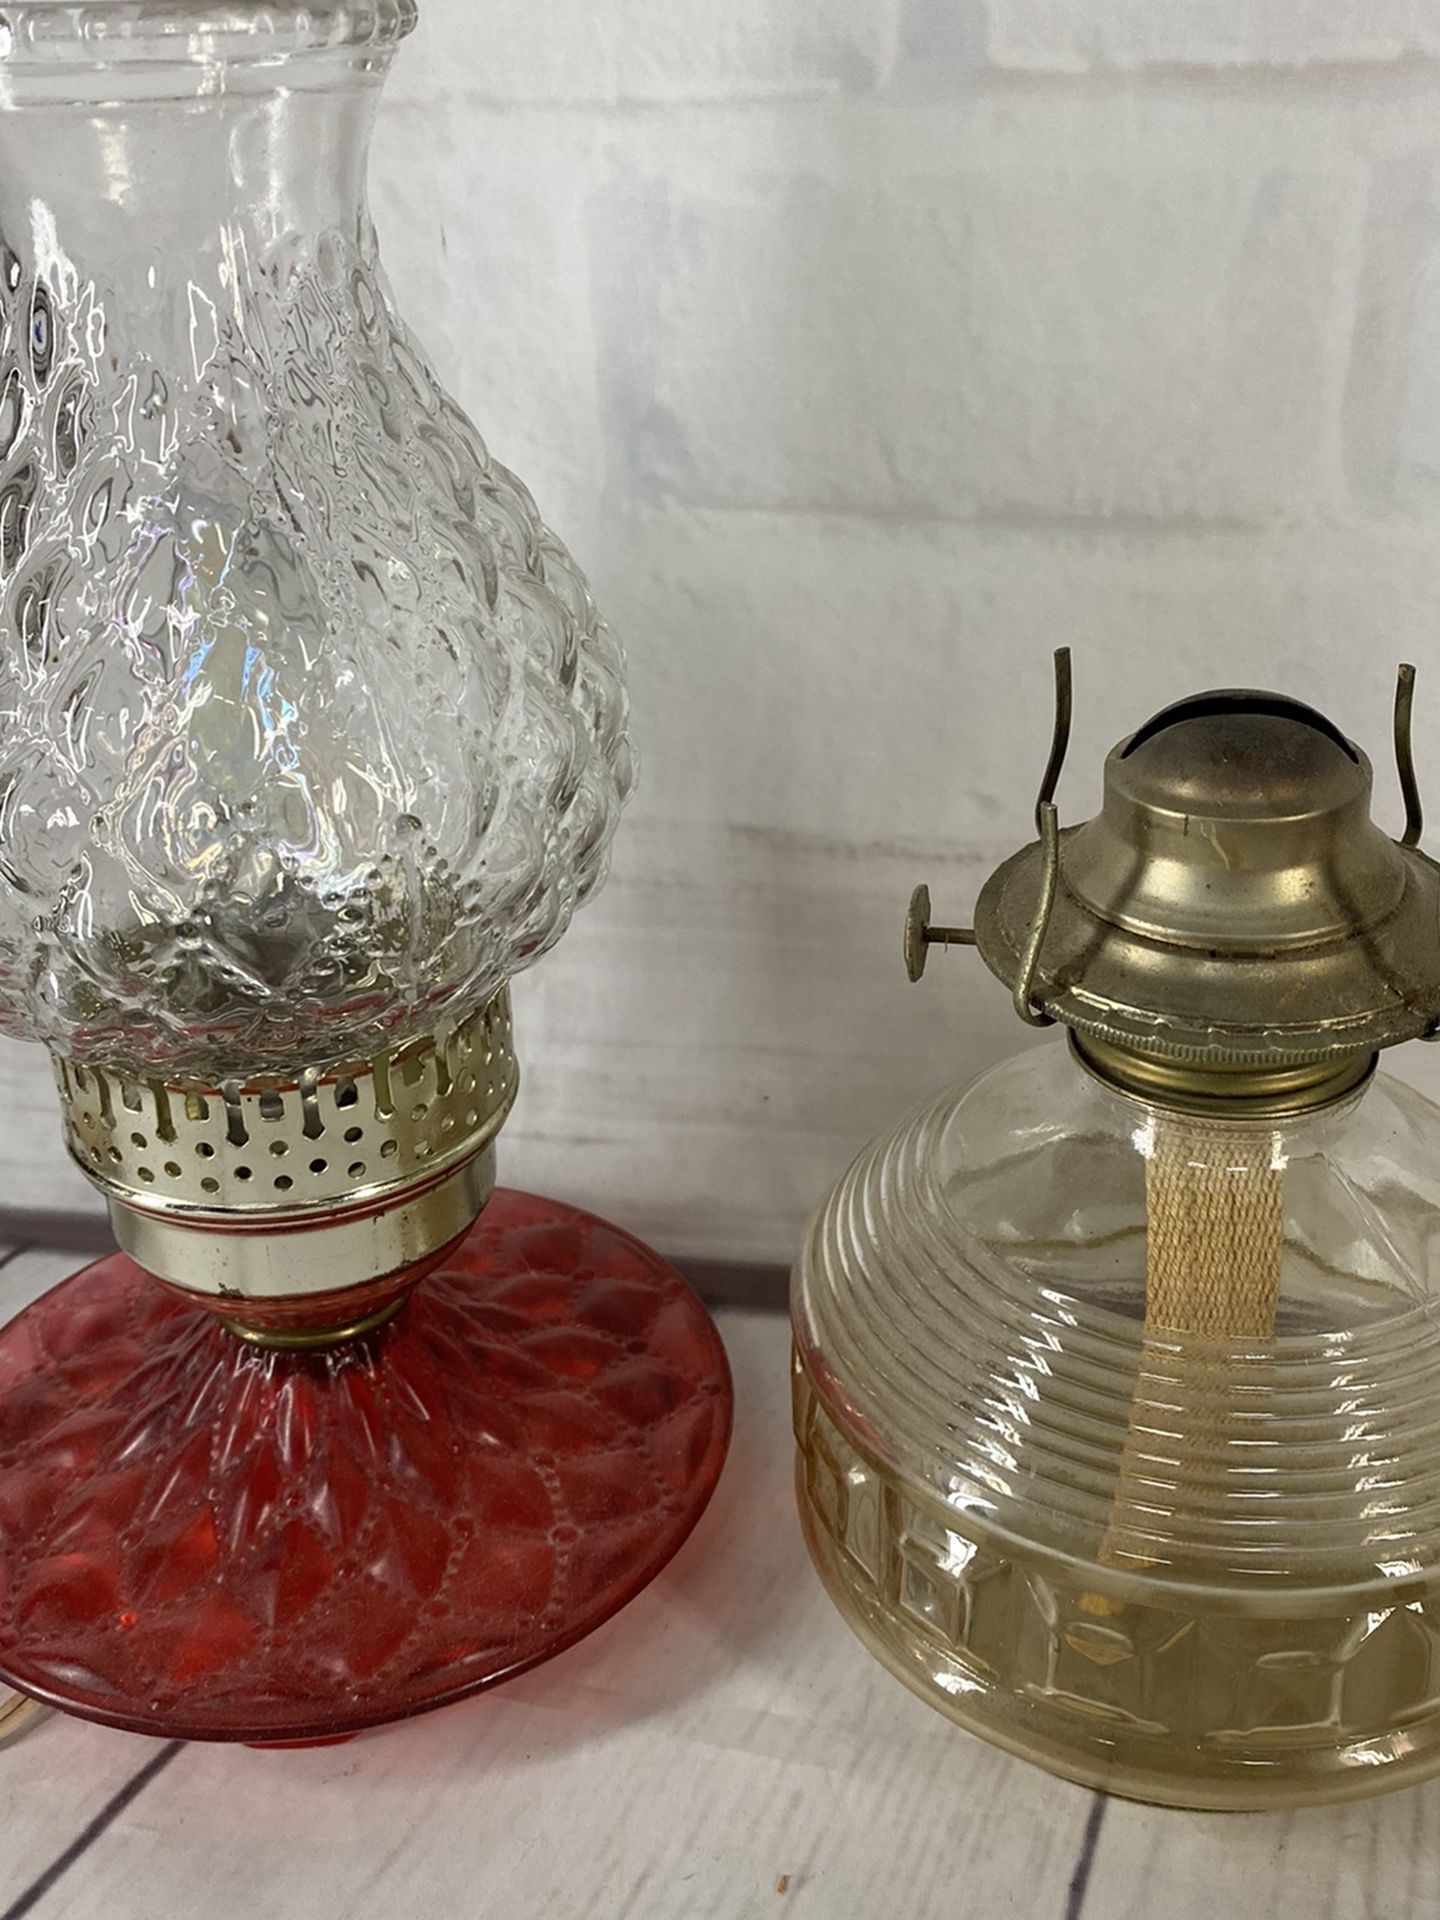 Vintage oil lamps one converted to electricity Beautiful glass pieces with a great look can deliver